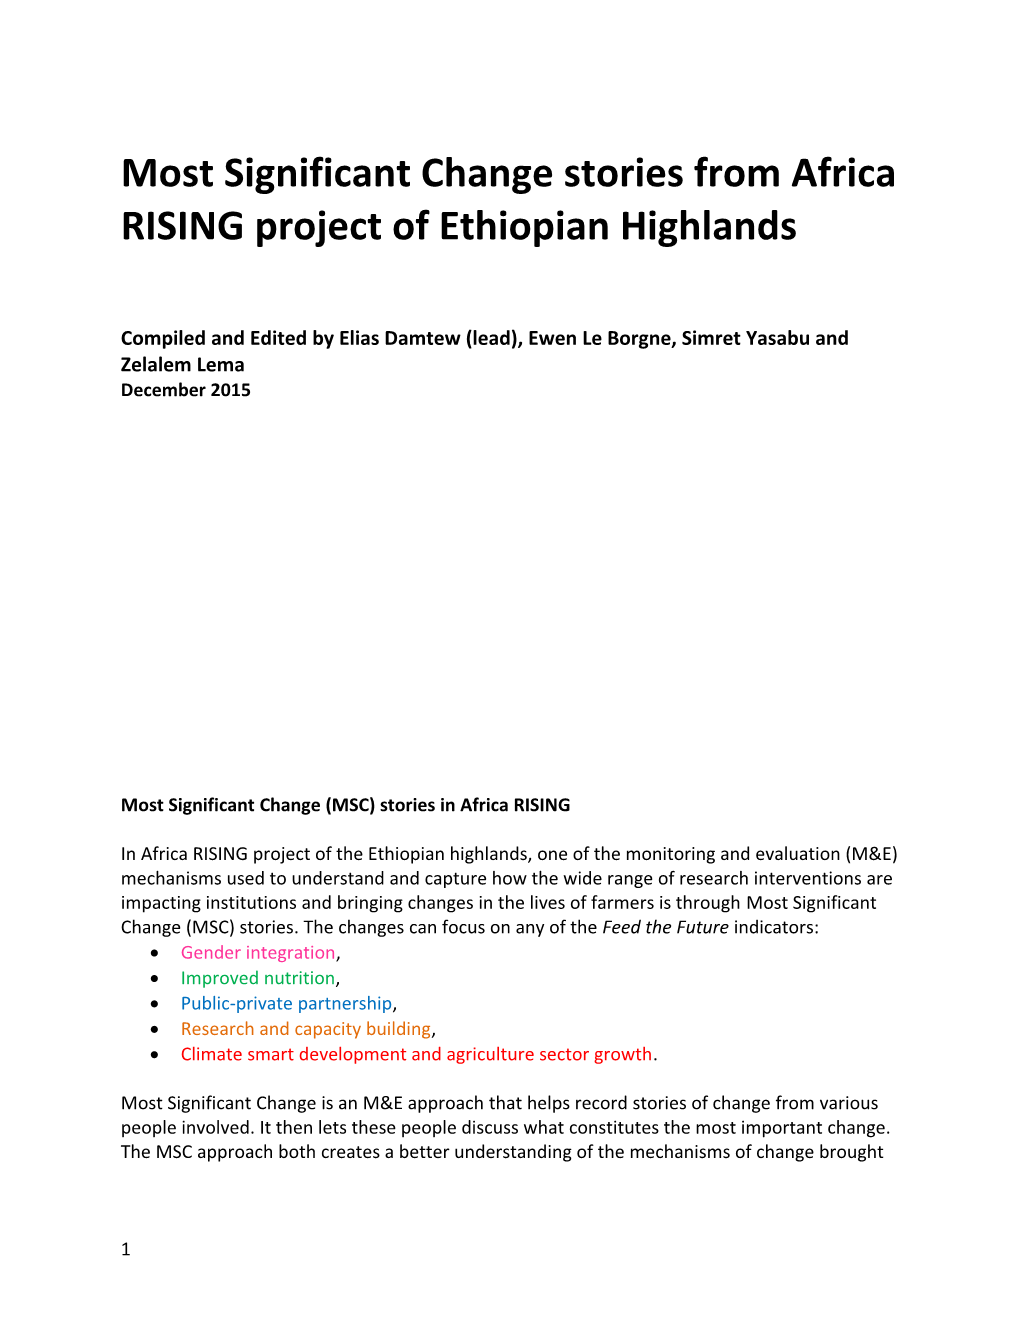 Most Significant Change Stories from Africa RISING Project of Ethiopian Highlands